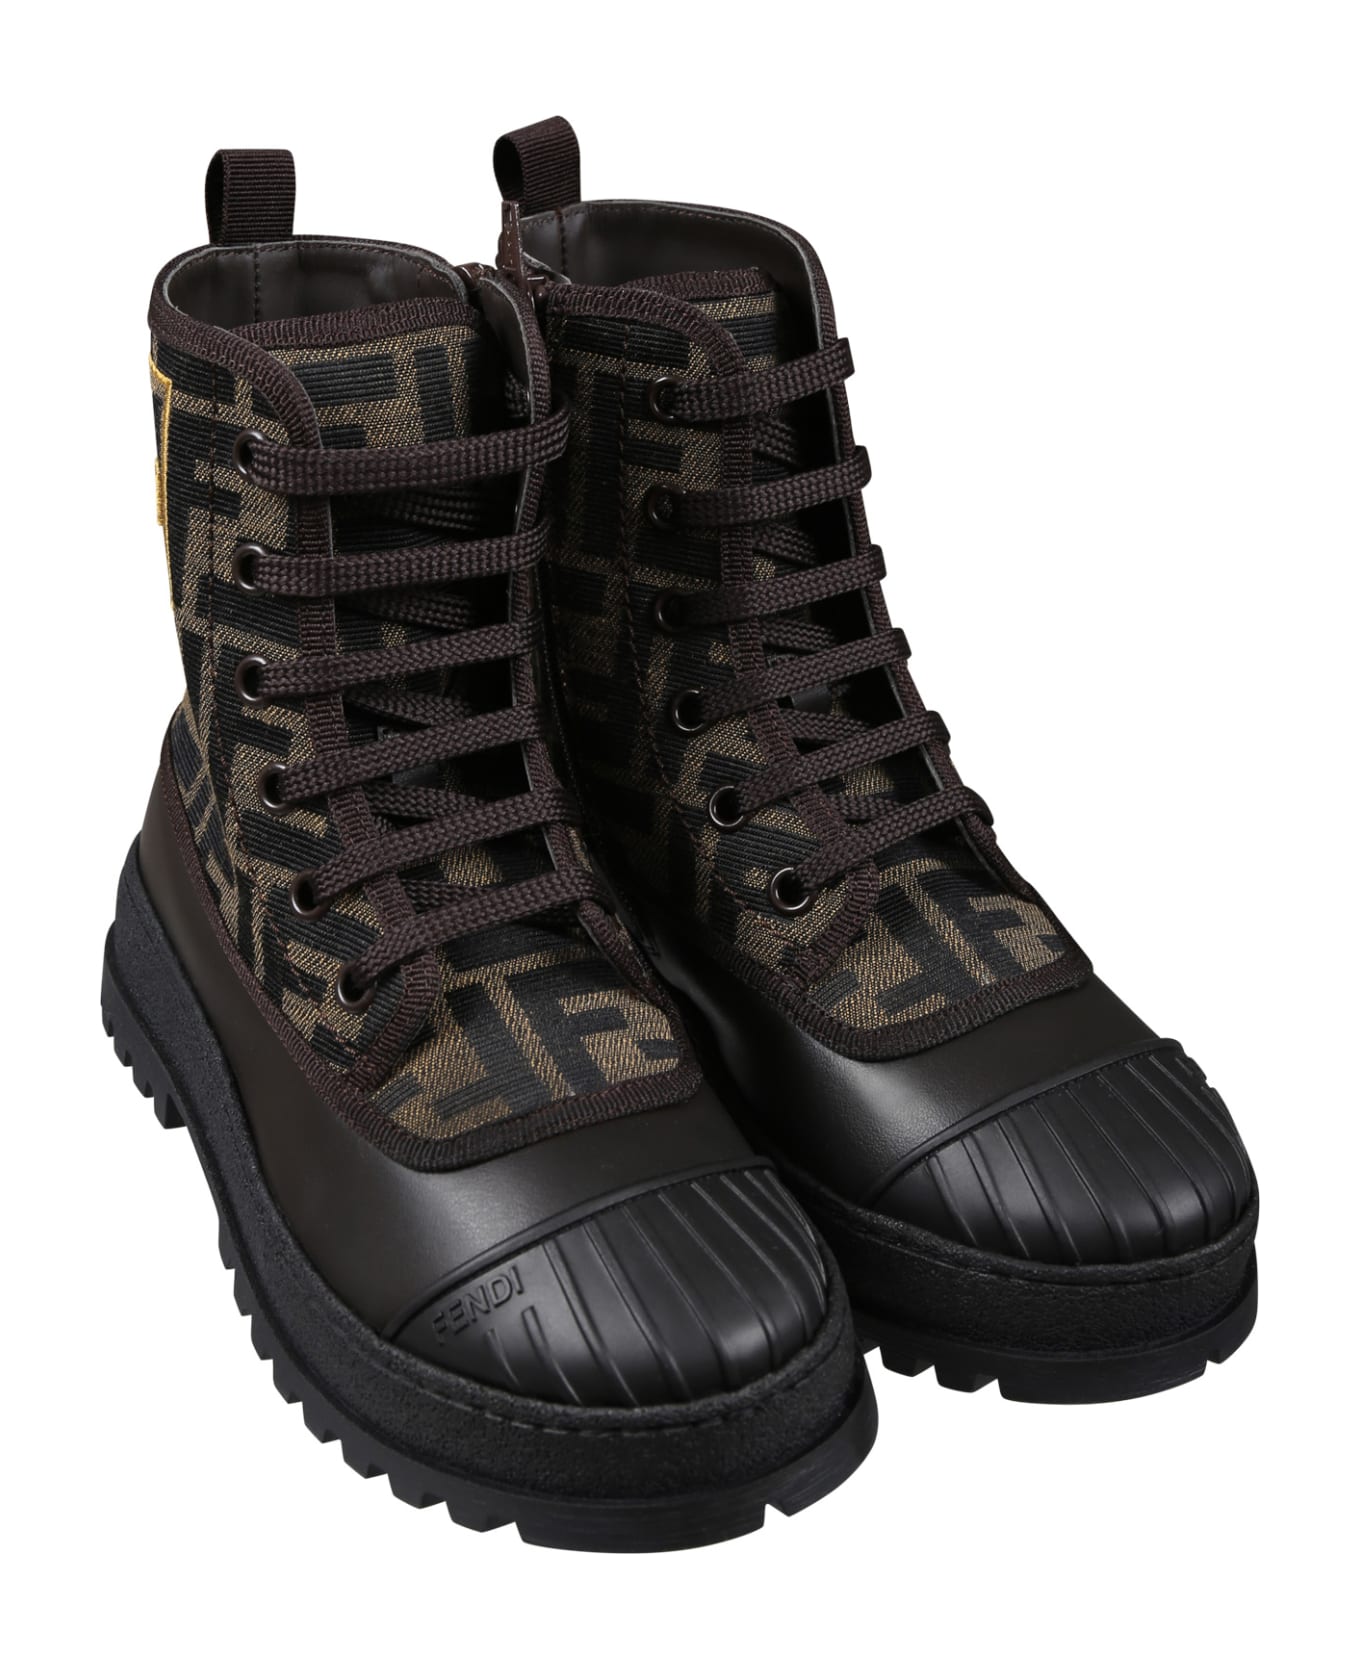 Fendi Brown Combat Boots For Kids With Ff Logo - Brown シューズ